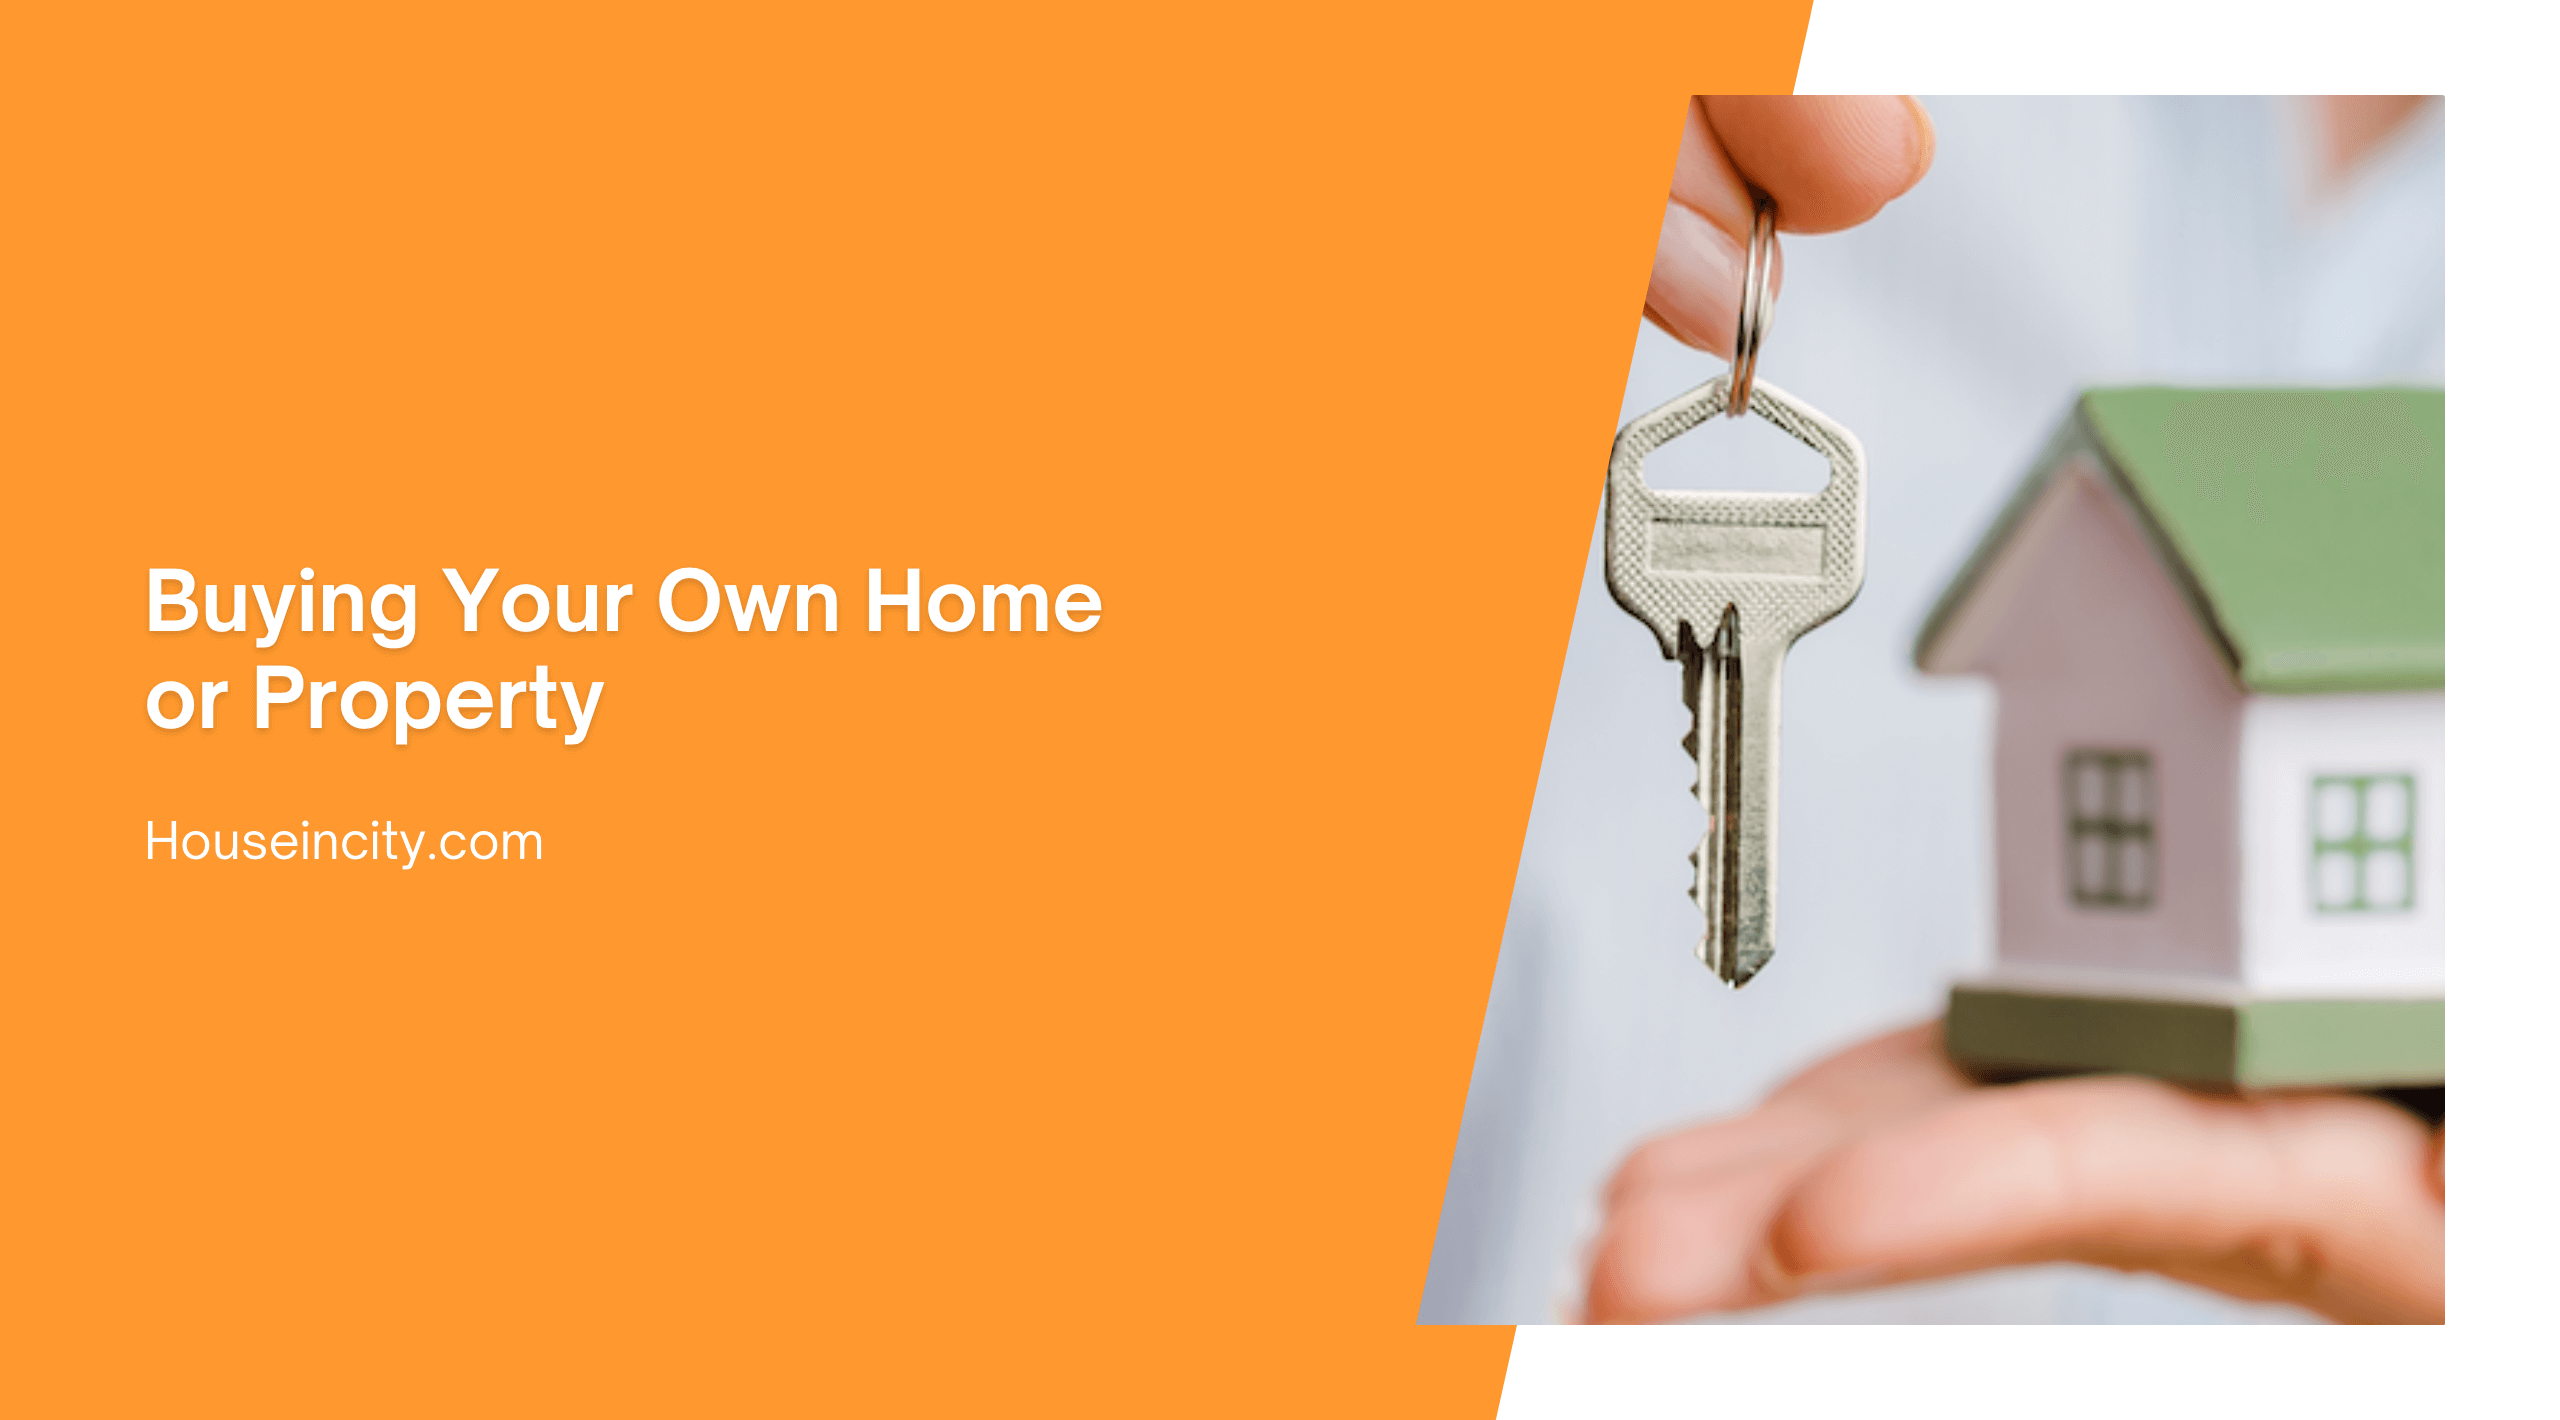 Buying Your Own Home or Property